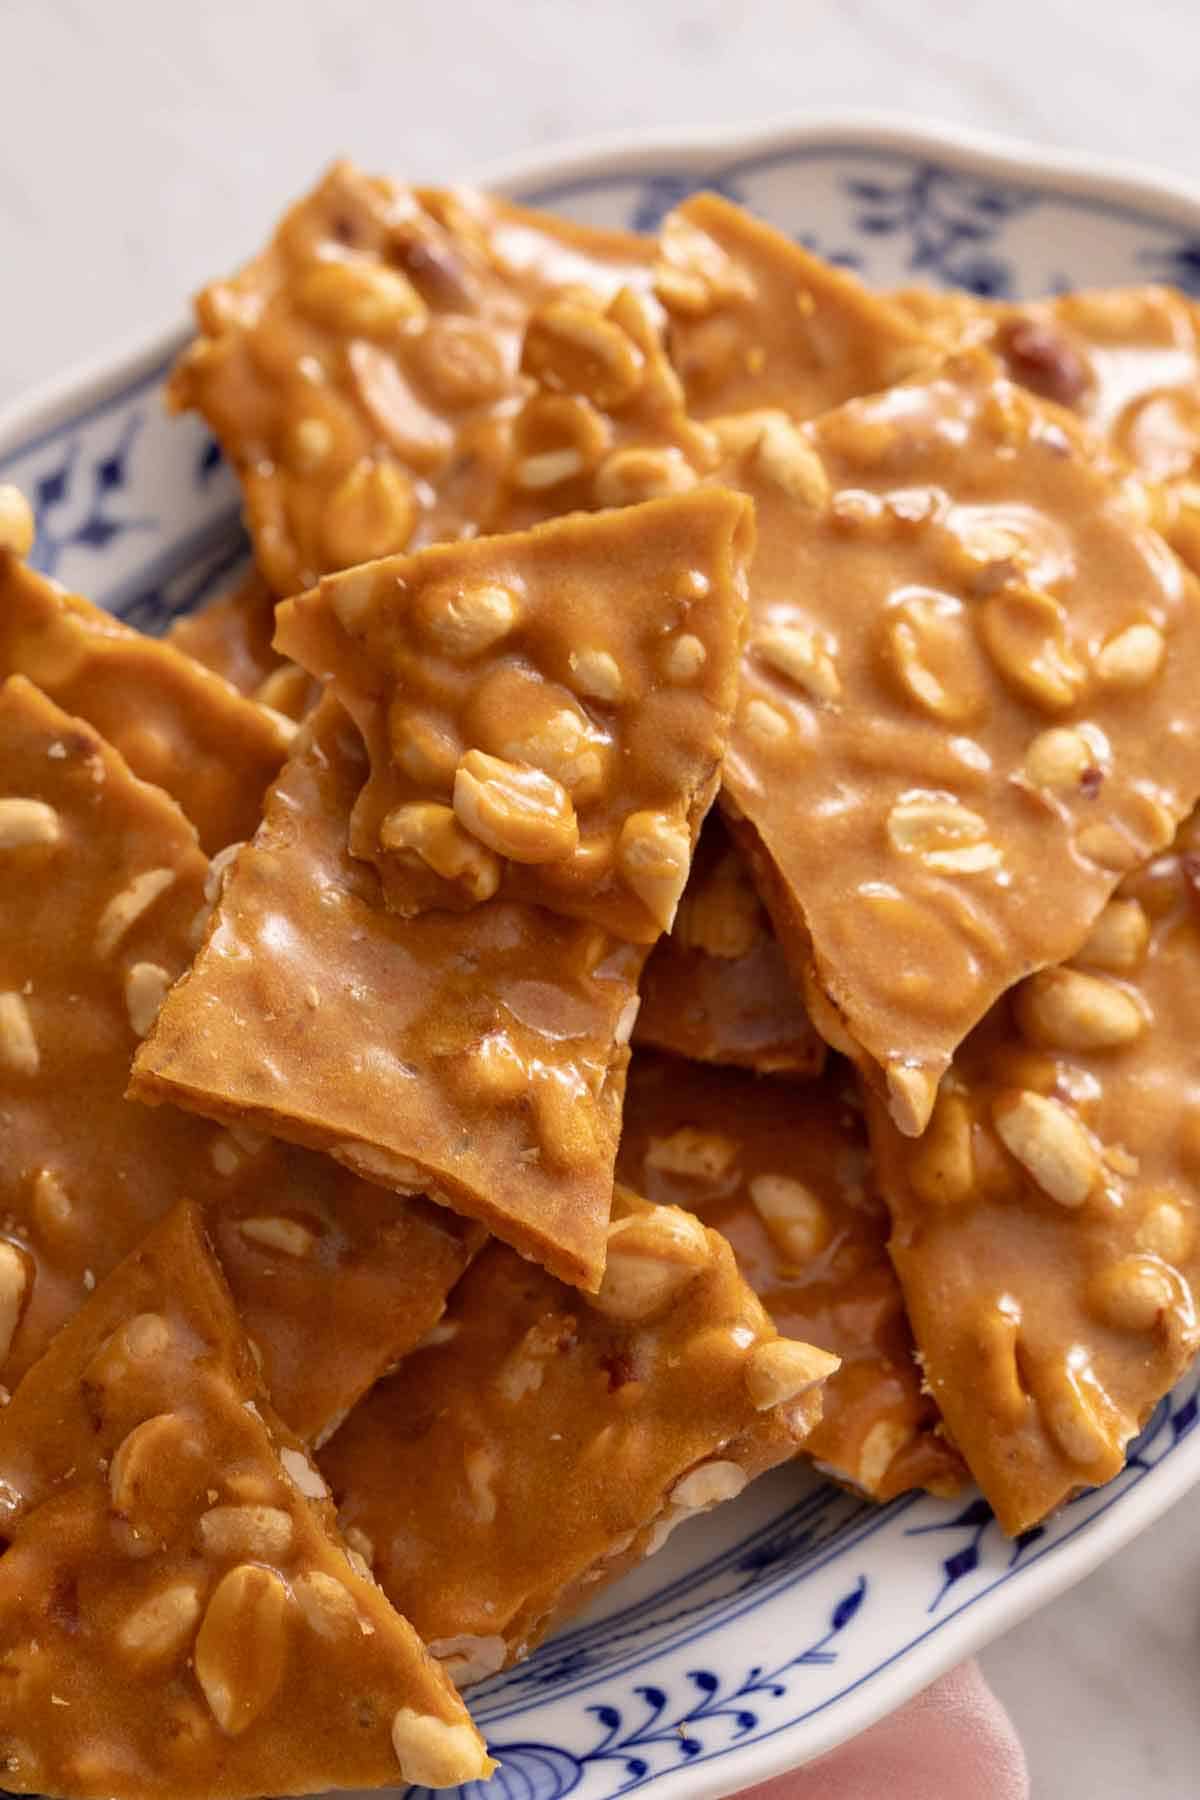 Multiple pieces of peanut brittle on a platter.